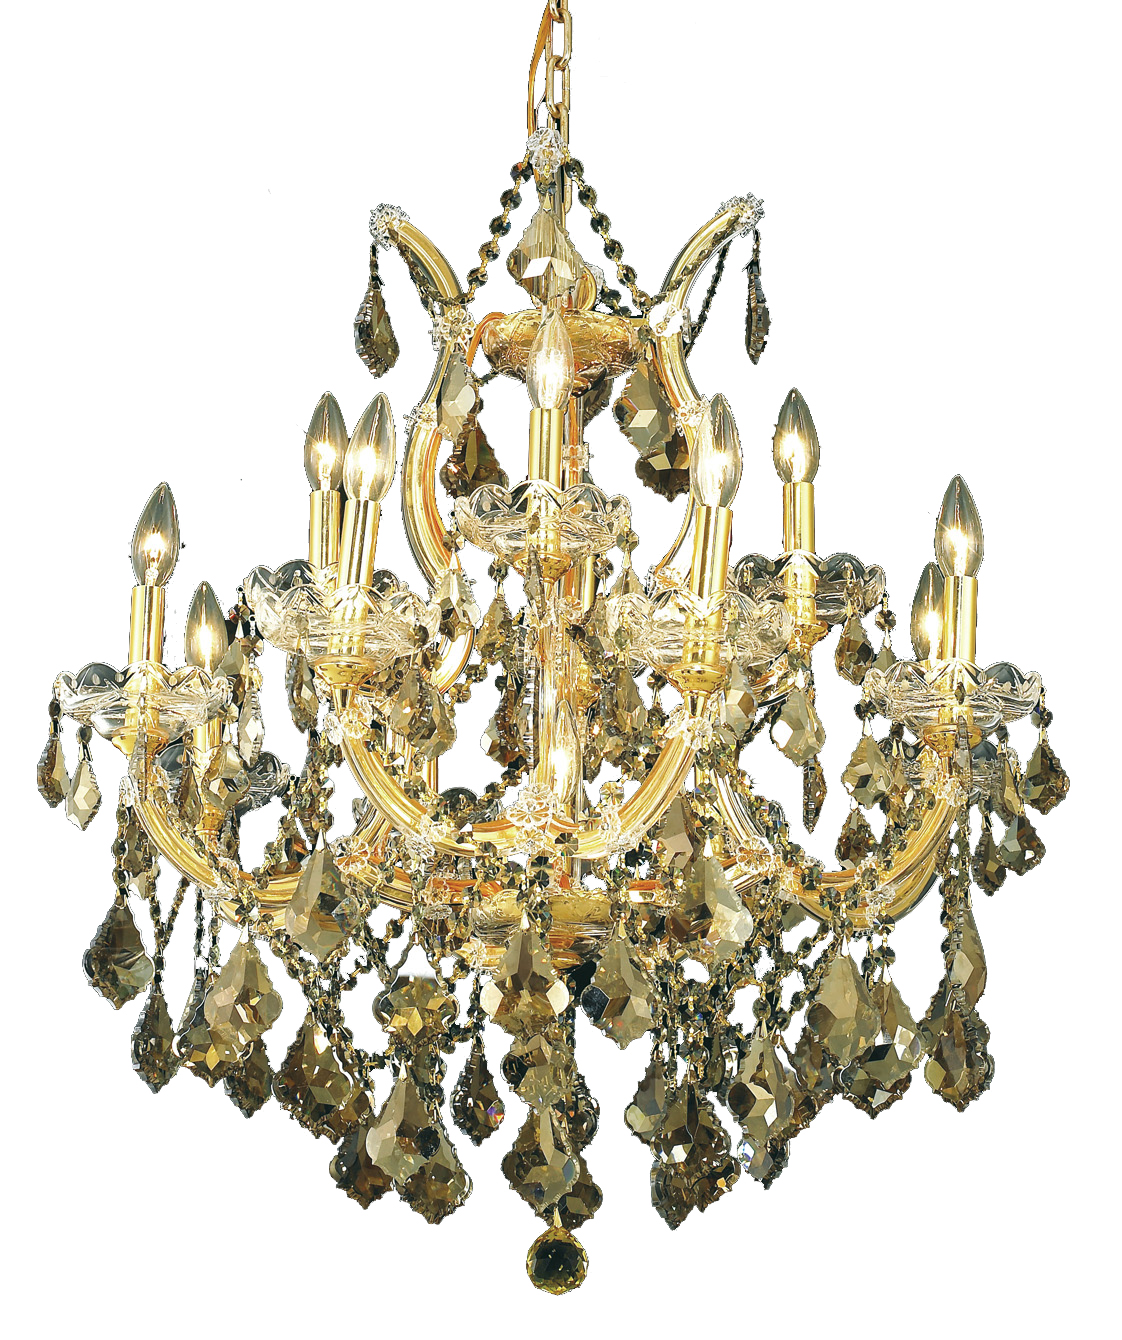 Elegant Lighting 2800 Maria Theresa Collection Chandelier D:27in H:26in Lt:13 Gold Finish (Royal Cut Crystals)